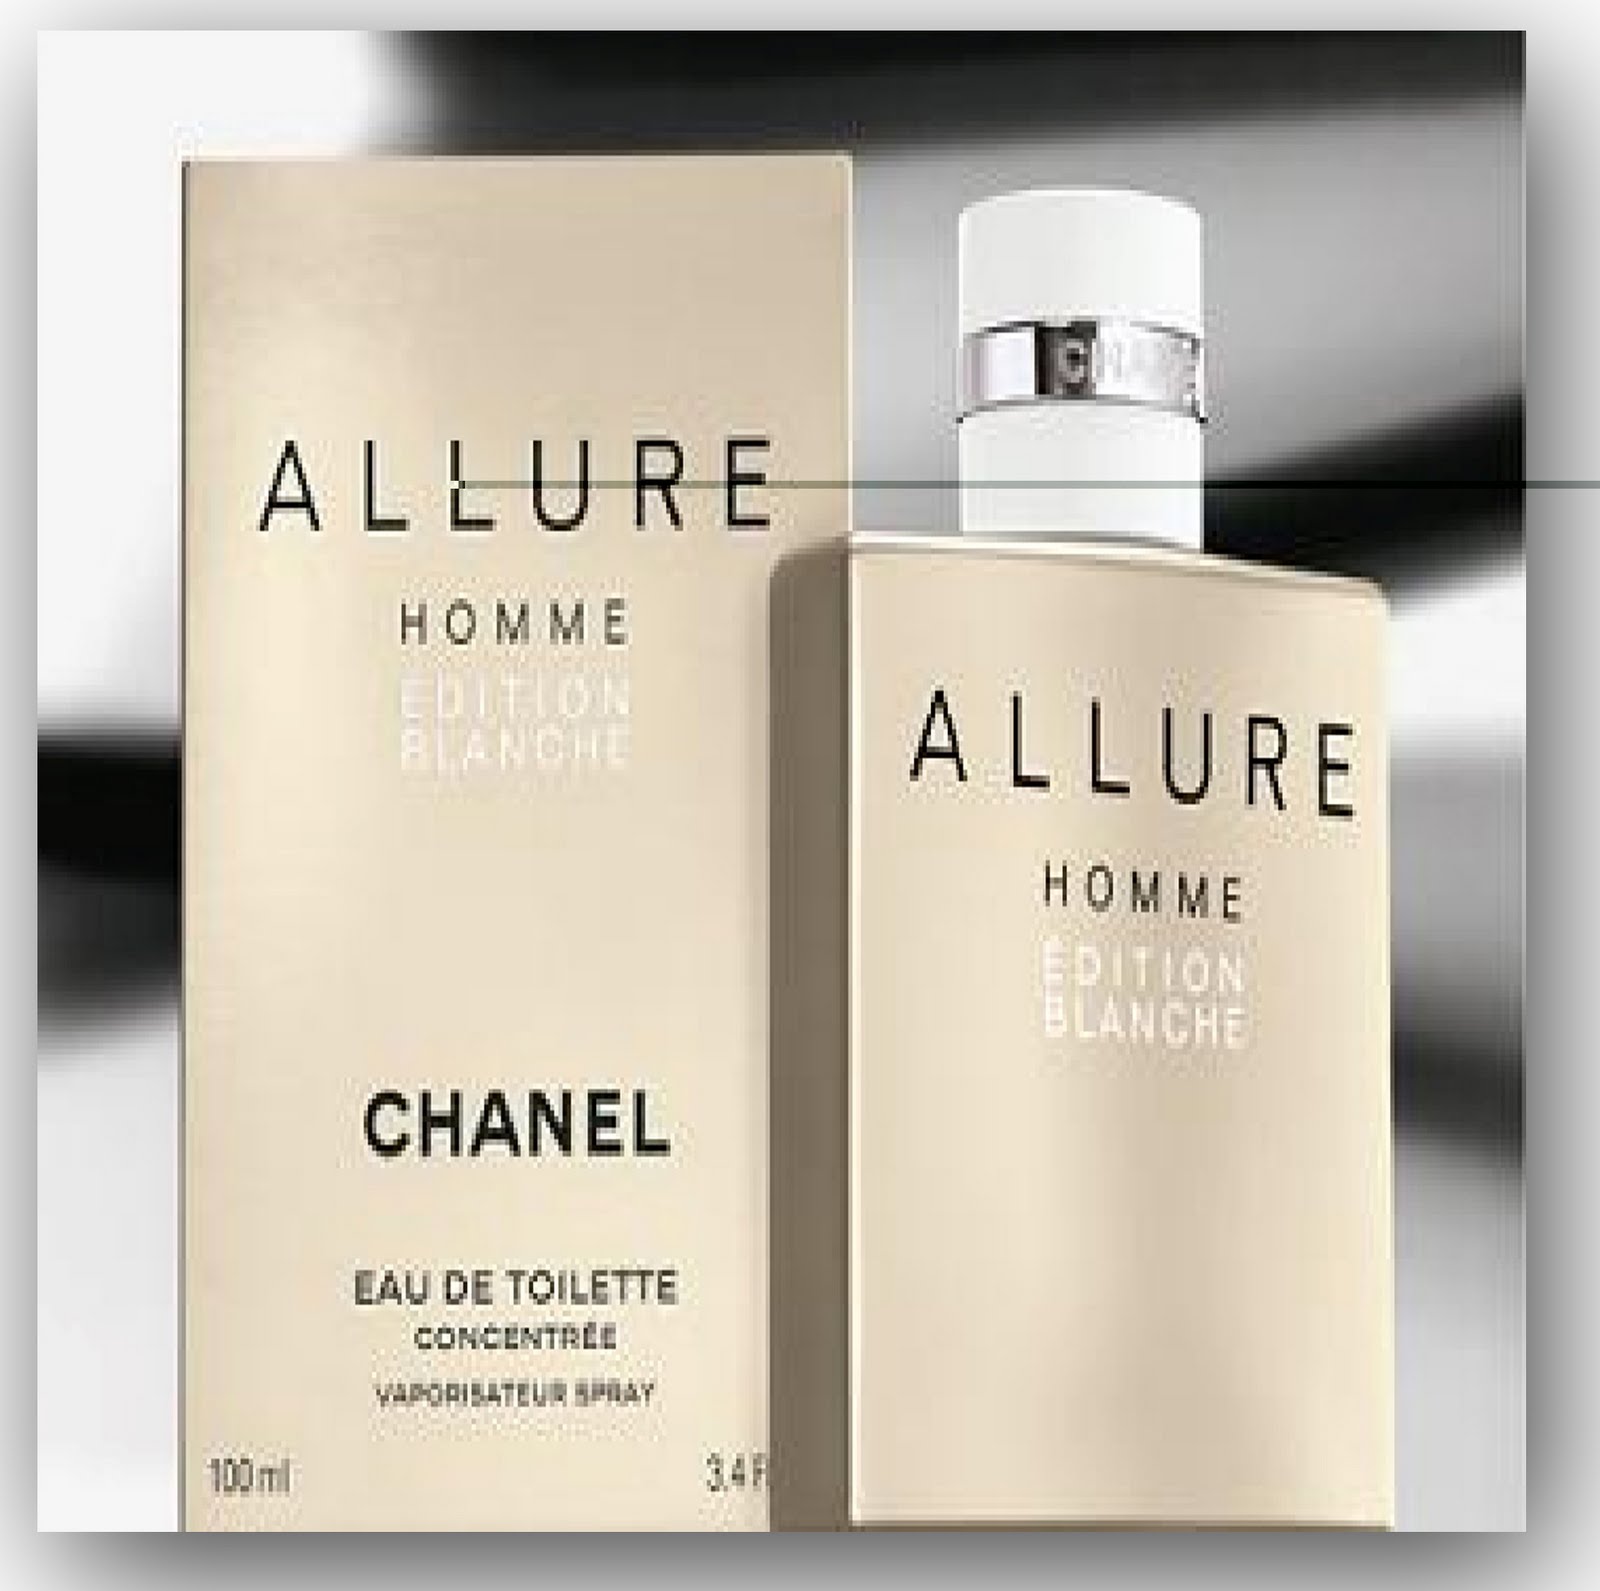 Chanel homme blanche. Chanel Allure homme Edition Blanche 100ml. Chanel Allure Edition Blanche men 50ml EDP. Chanel Allure homme Edition Blanche EDP, 100 ml (Luxe евро). Chanel Allure homme Edition Blanche for men EDP 100ml.